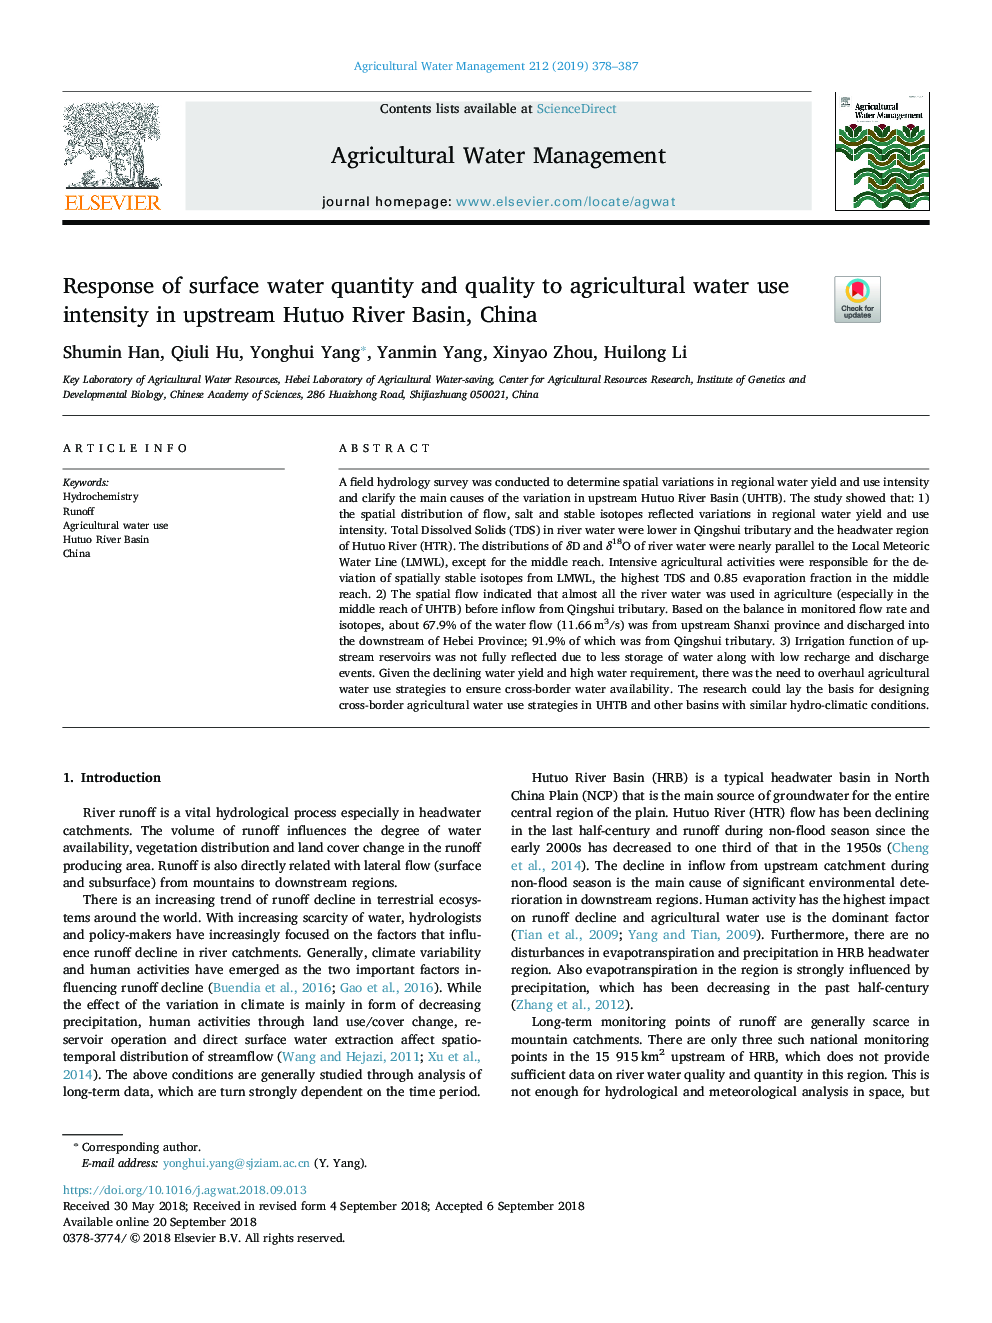 Response of surface water quantity and quality to agricultural water use intensity in upstream Hutuo River Basin, China